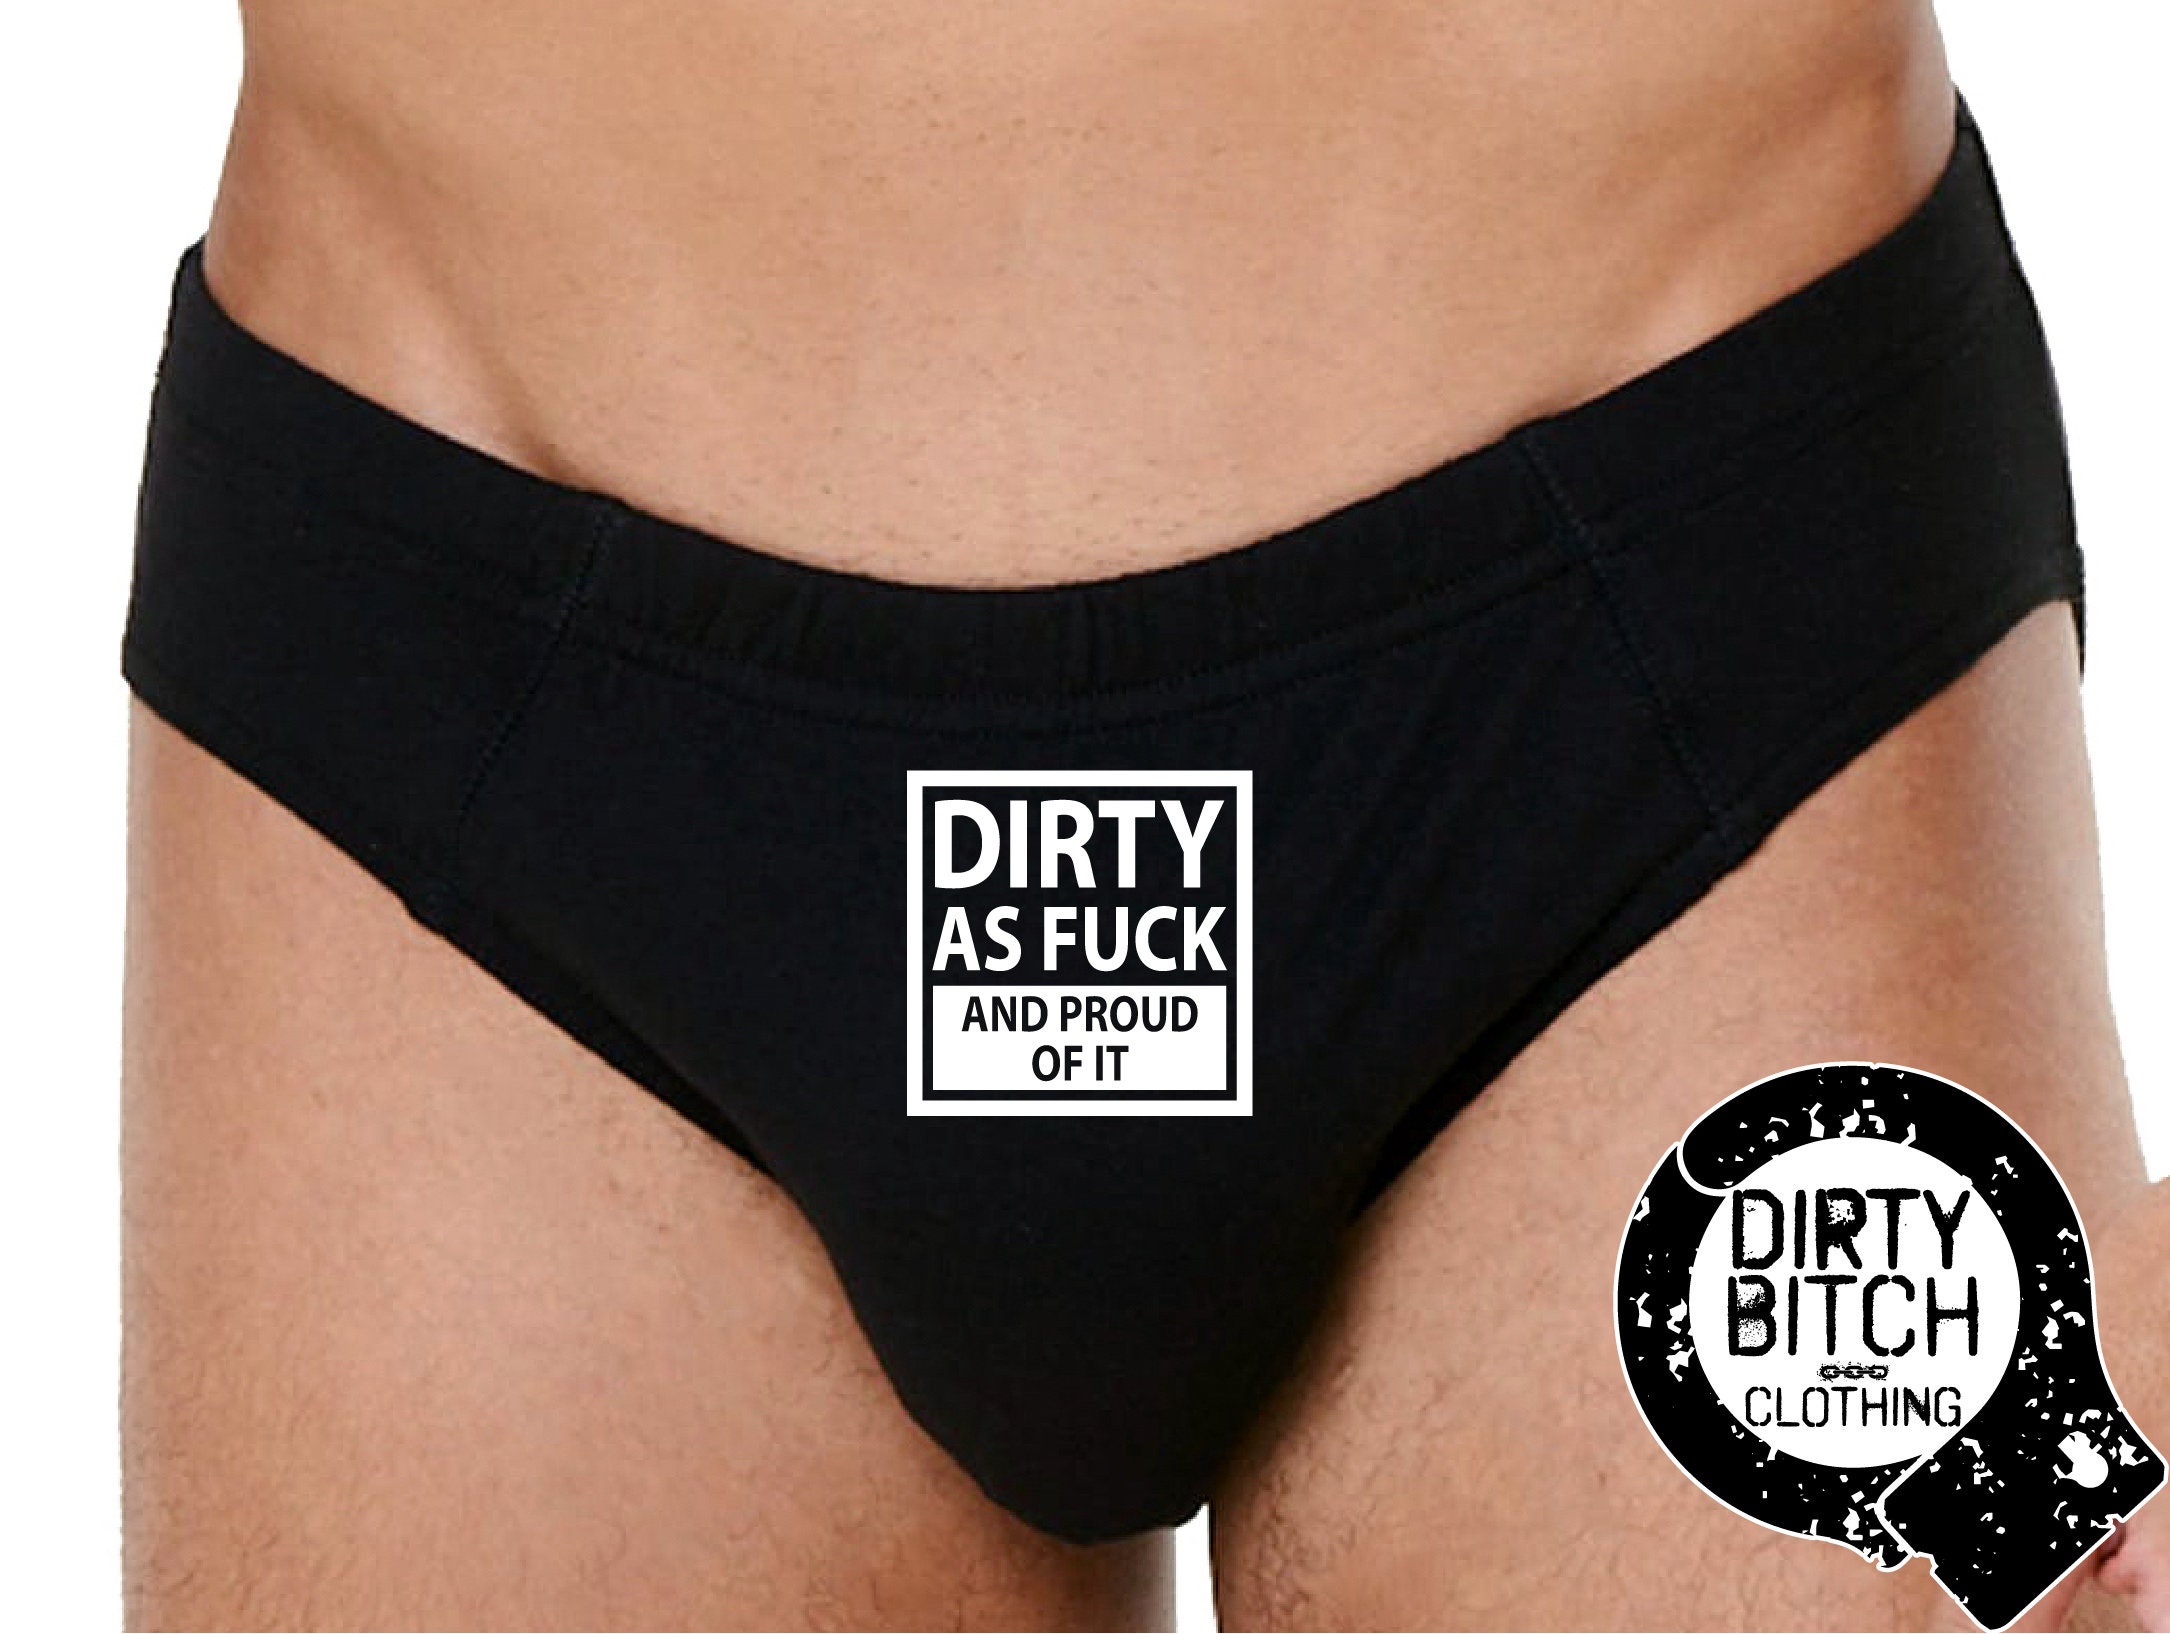 Dirty as Fuck and Proud of It Mens Underwear Adult Fetish pic